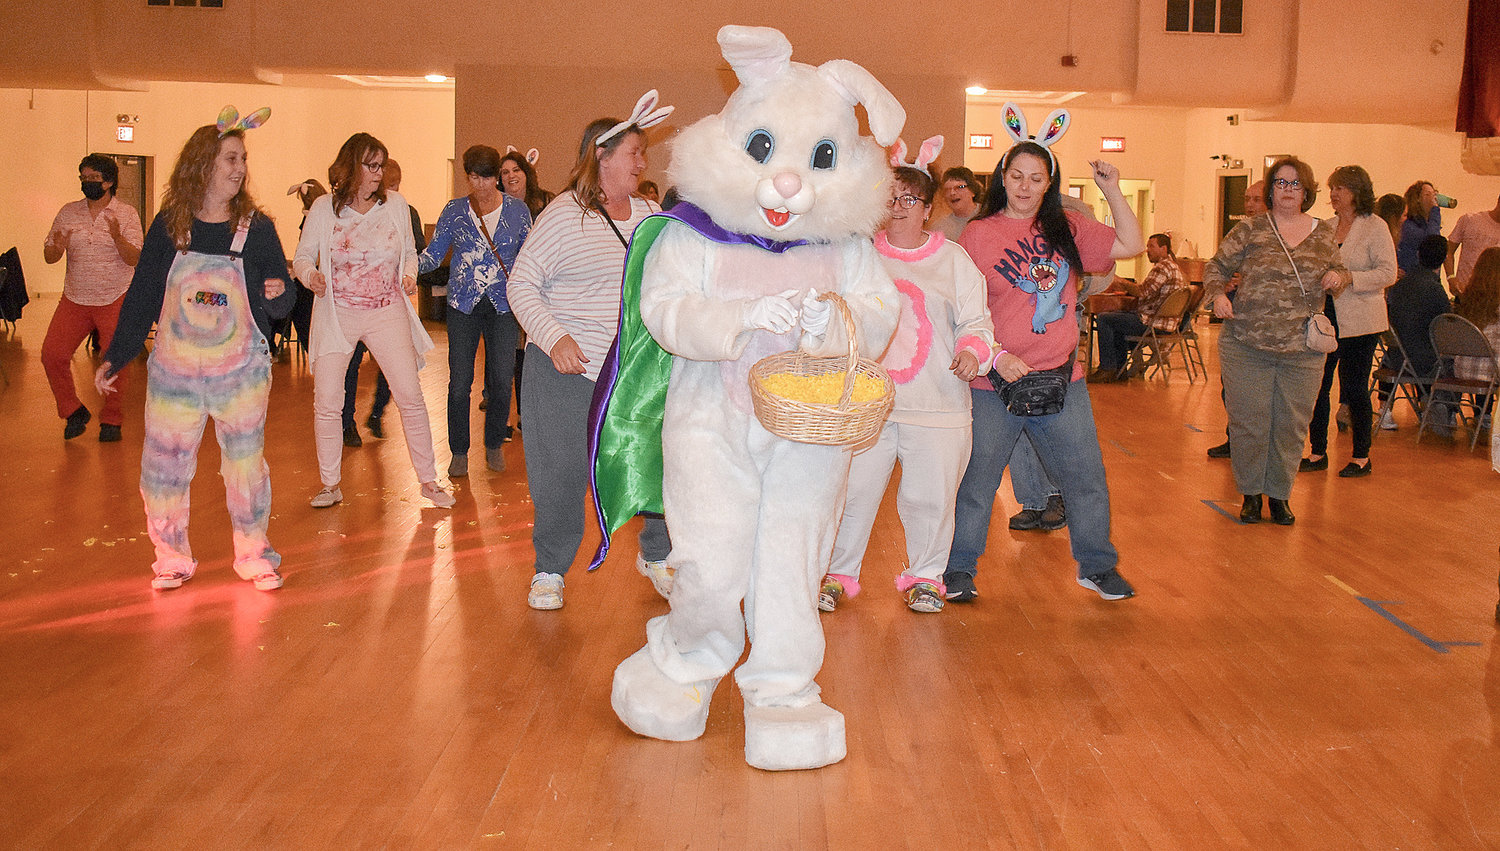 EASTER DANCING — Local residents enjoy themselves and let loose at the Jessica’s Heroes Adult Easter Egg Hunt, raising money to help those fighting cancer in the area.